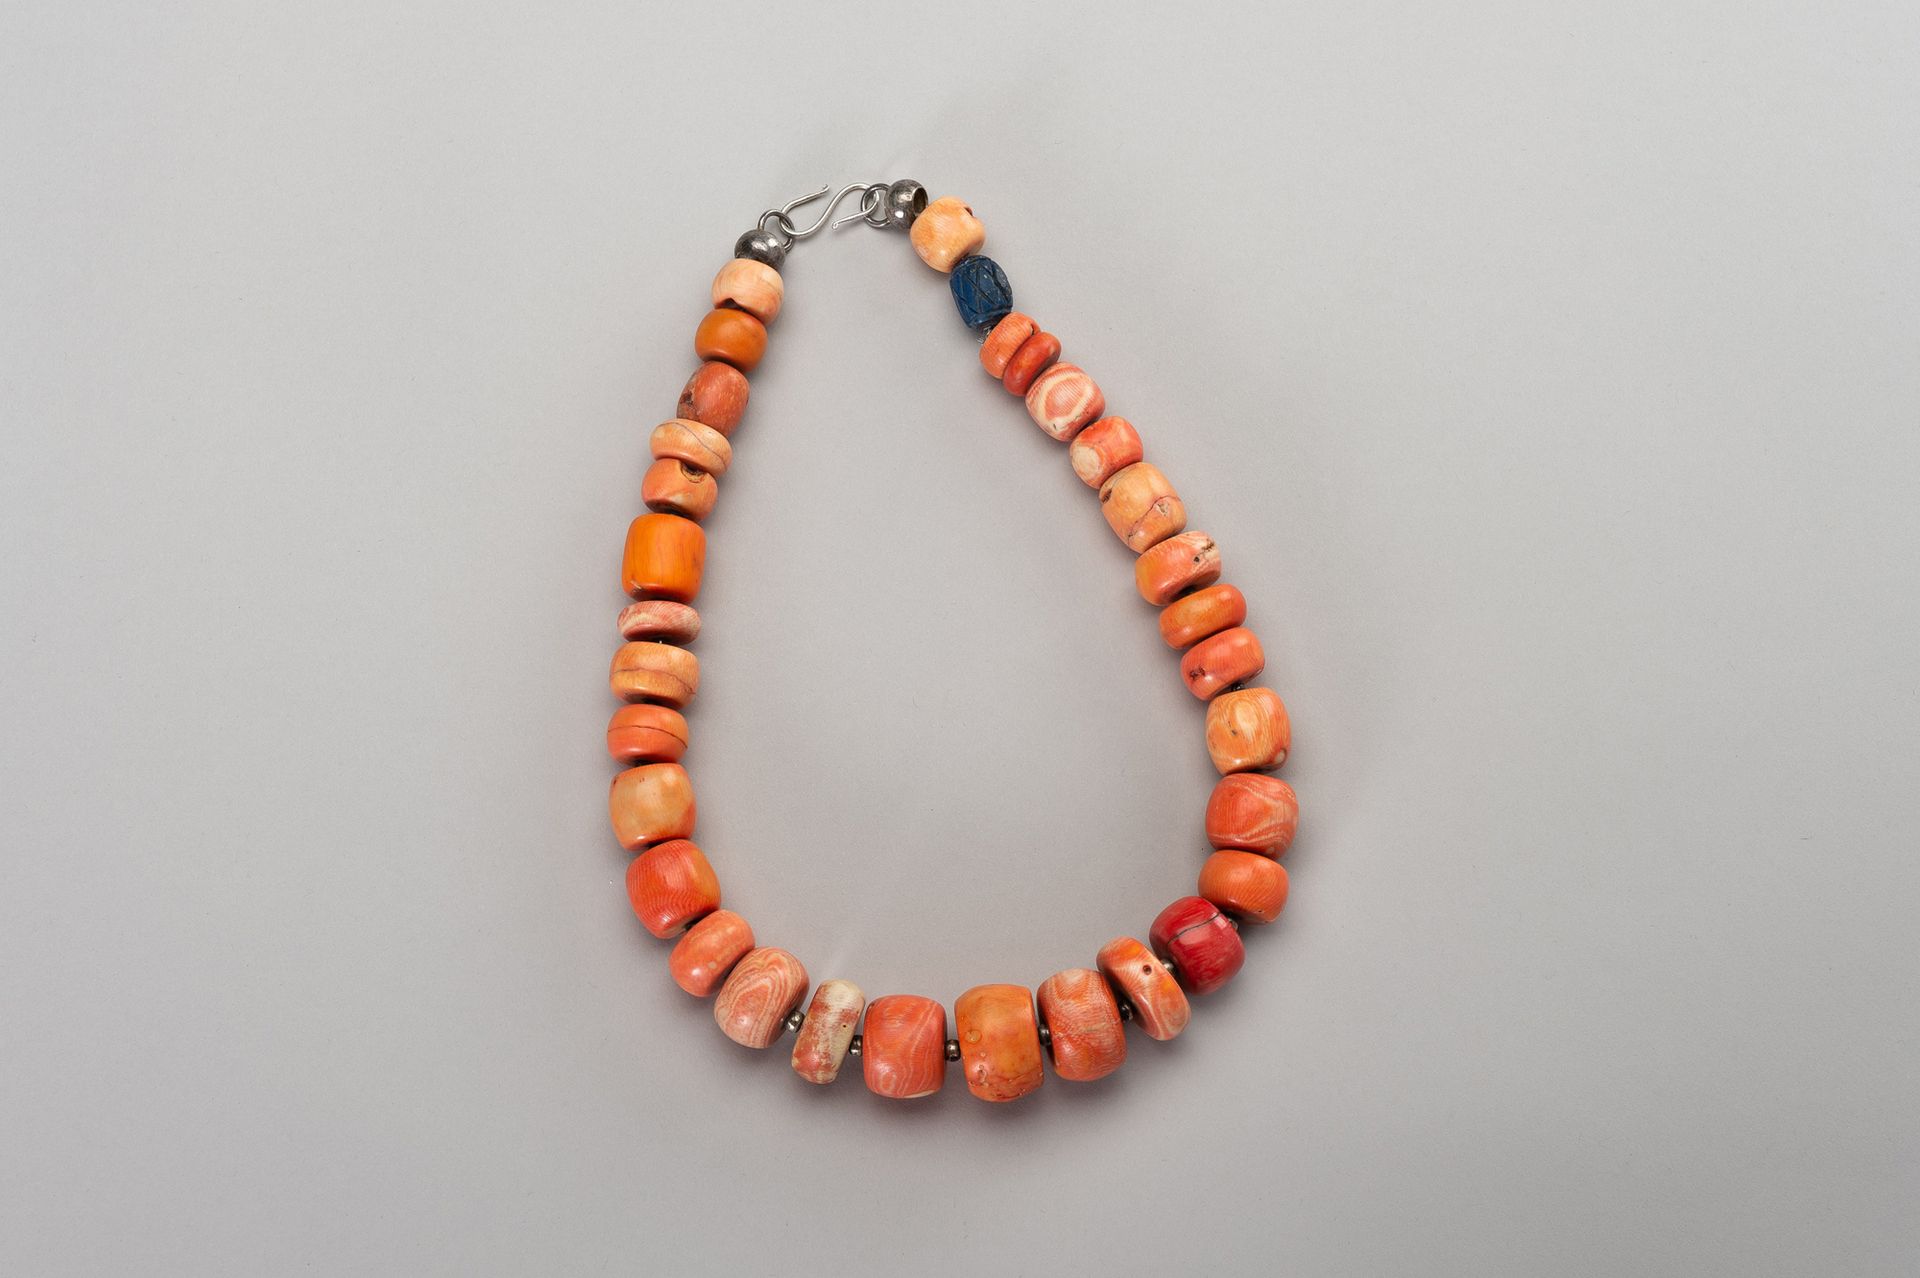 A CORAL NECKLACE WITH EXPERTISE KORALLENHALSKETTE MIT EXPERTISE
Tibet, 1900 bis &hellip;